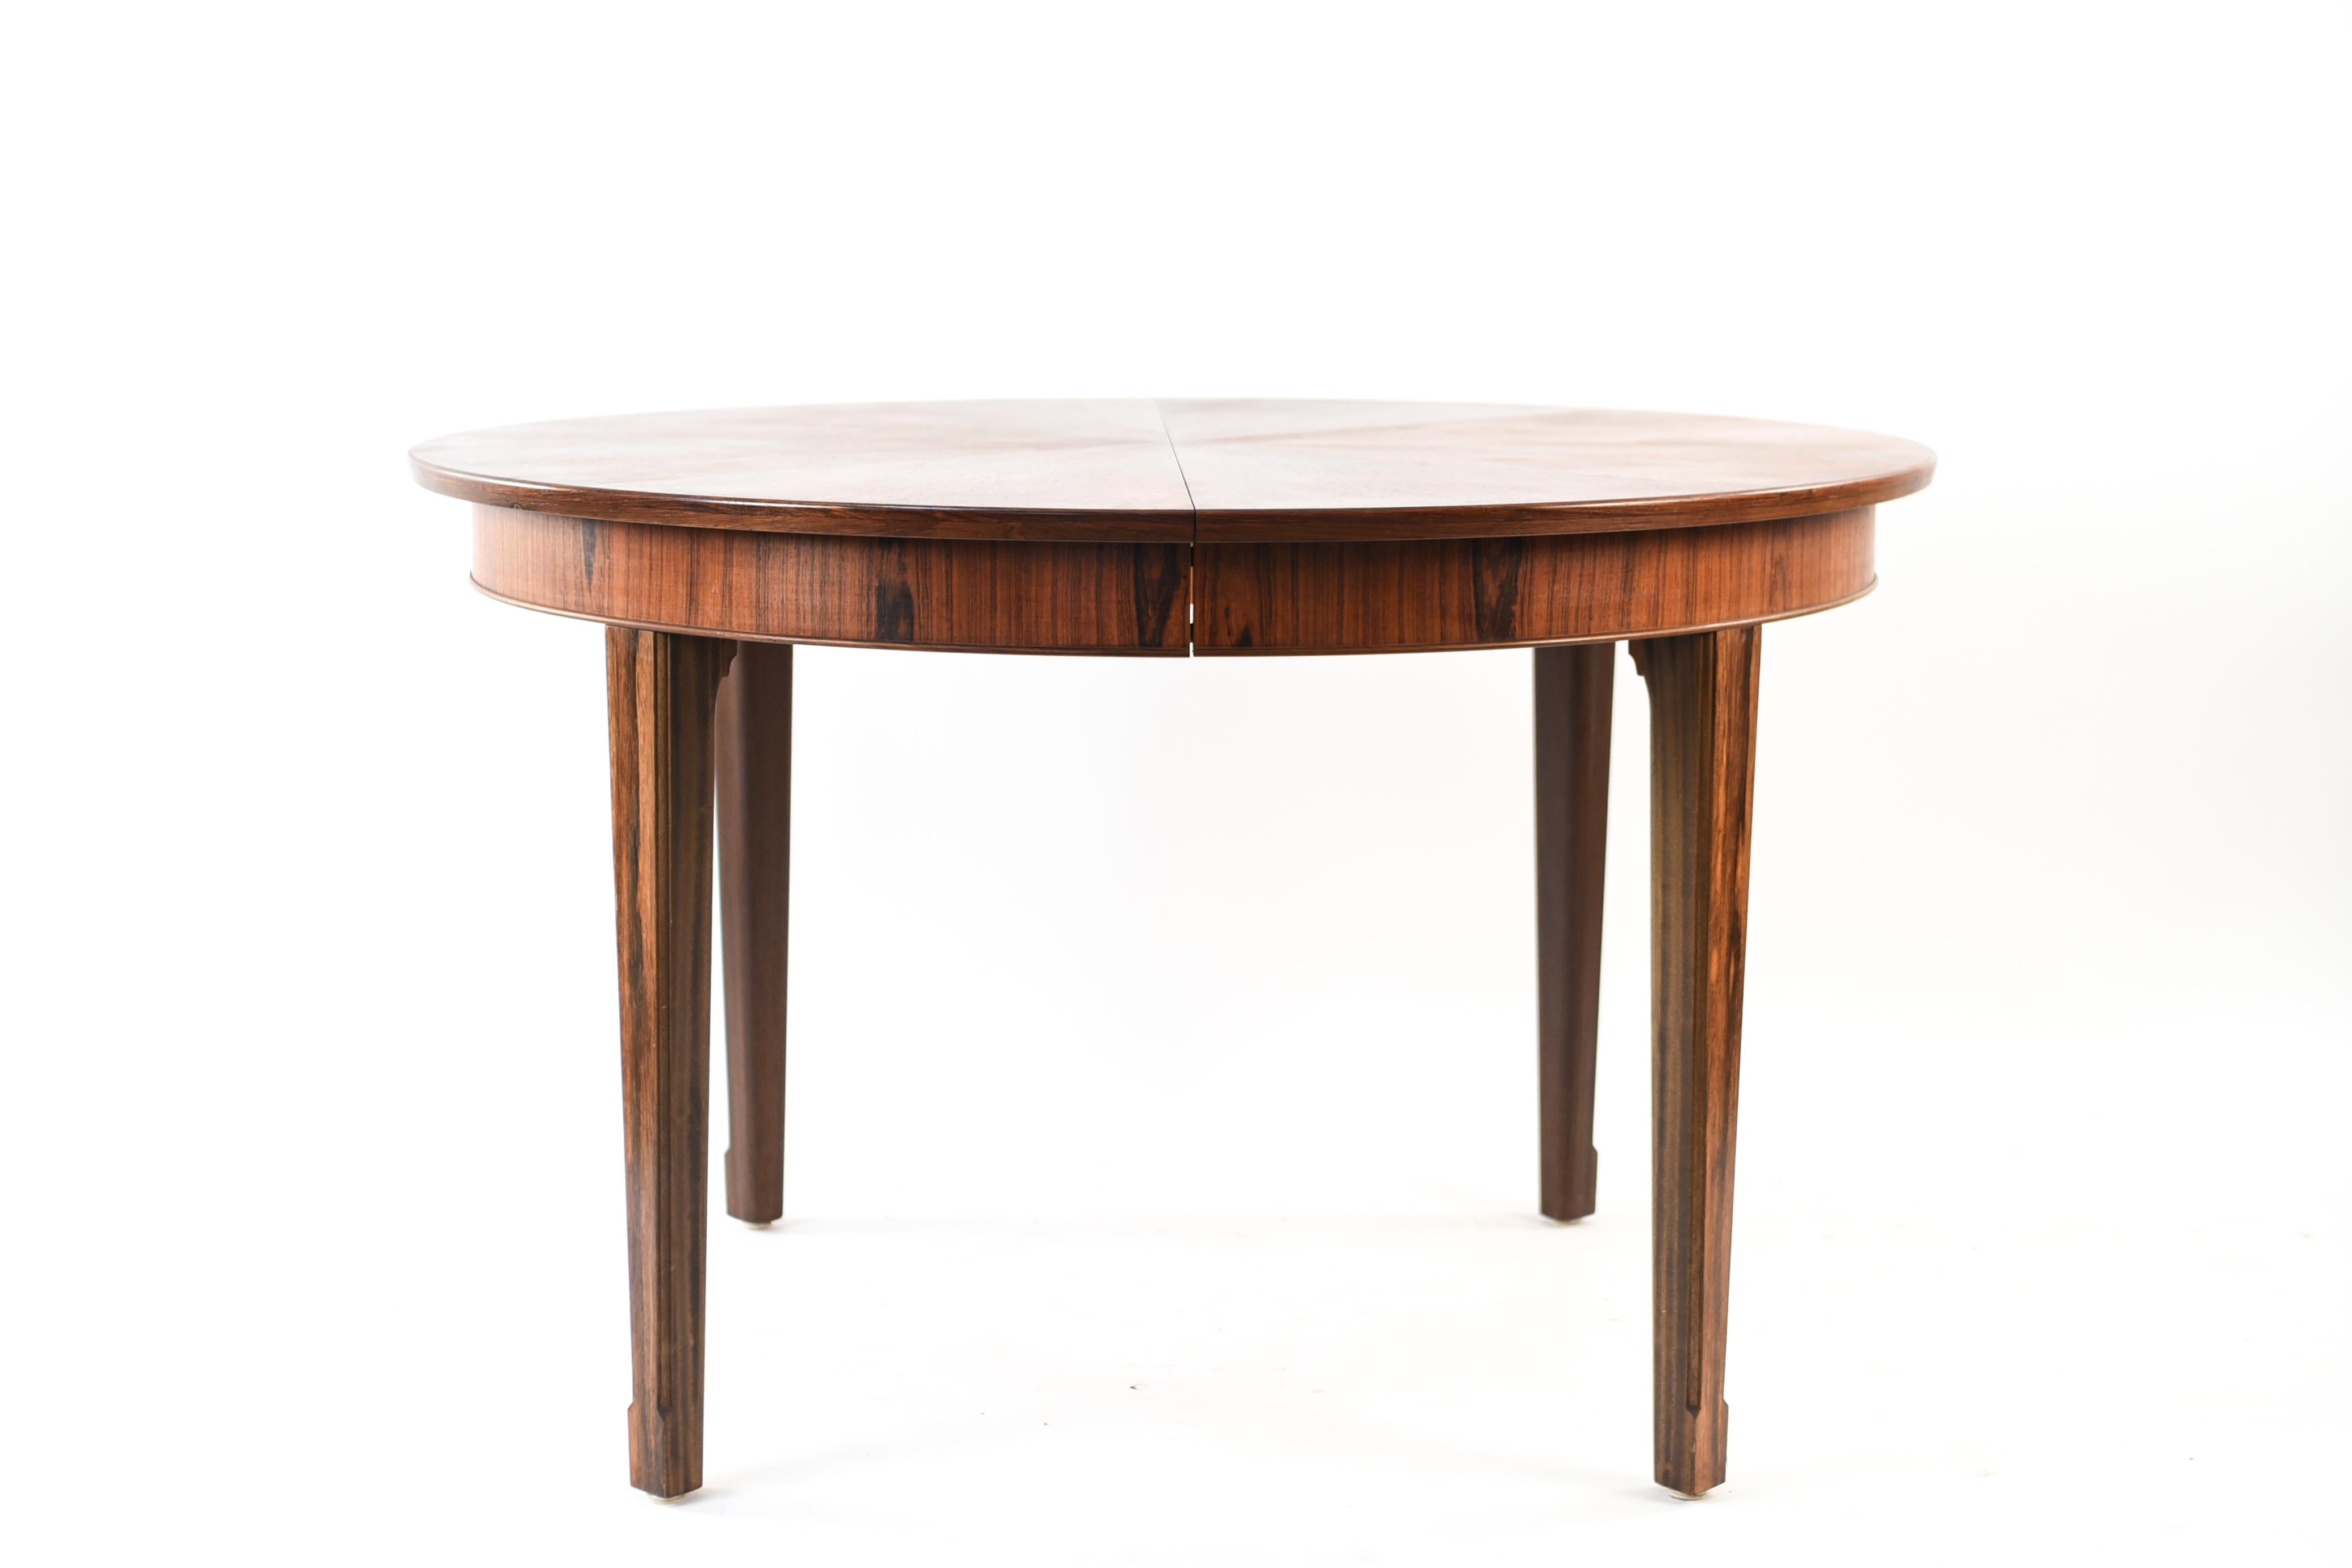 This Danish midcentury rosewood dining table by Frits Henningsen has a handsome radial veneer on the top that accentuates the unusual circular form. This is an exemplary showcase of Henningsen's well sought after work. Includes one original leaf and